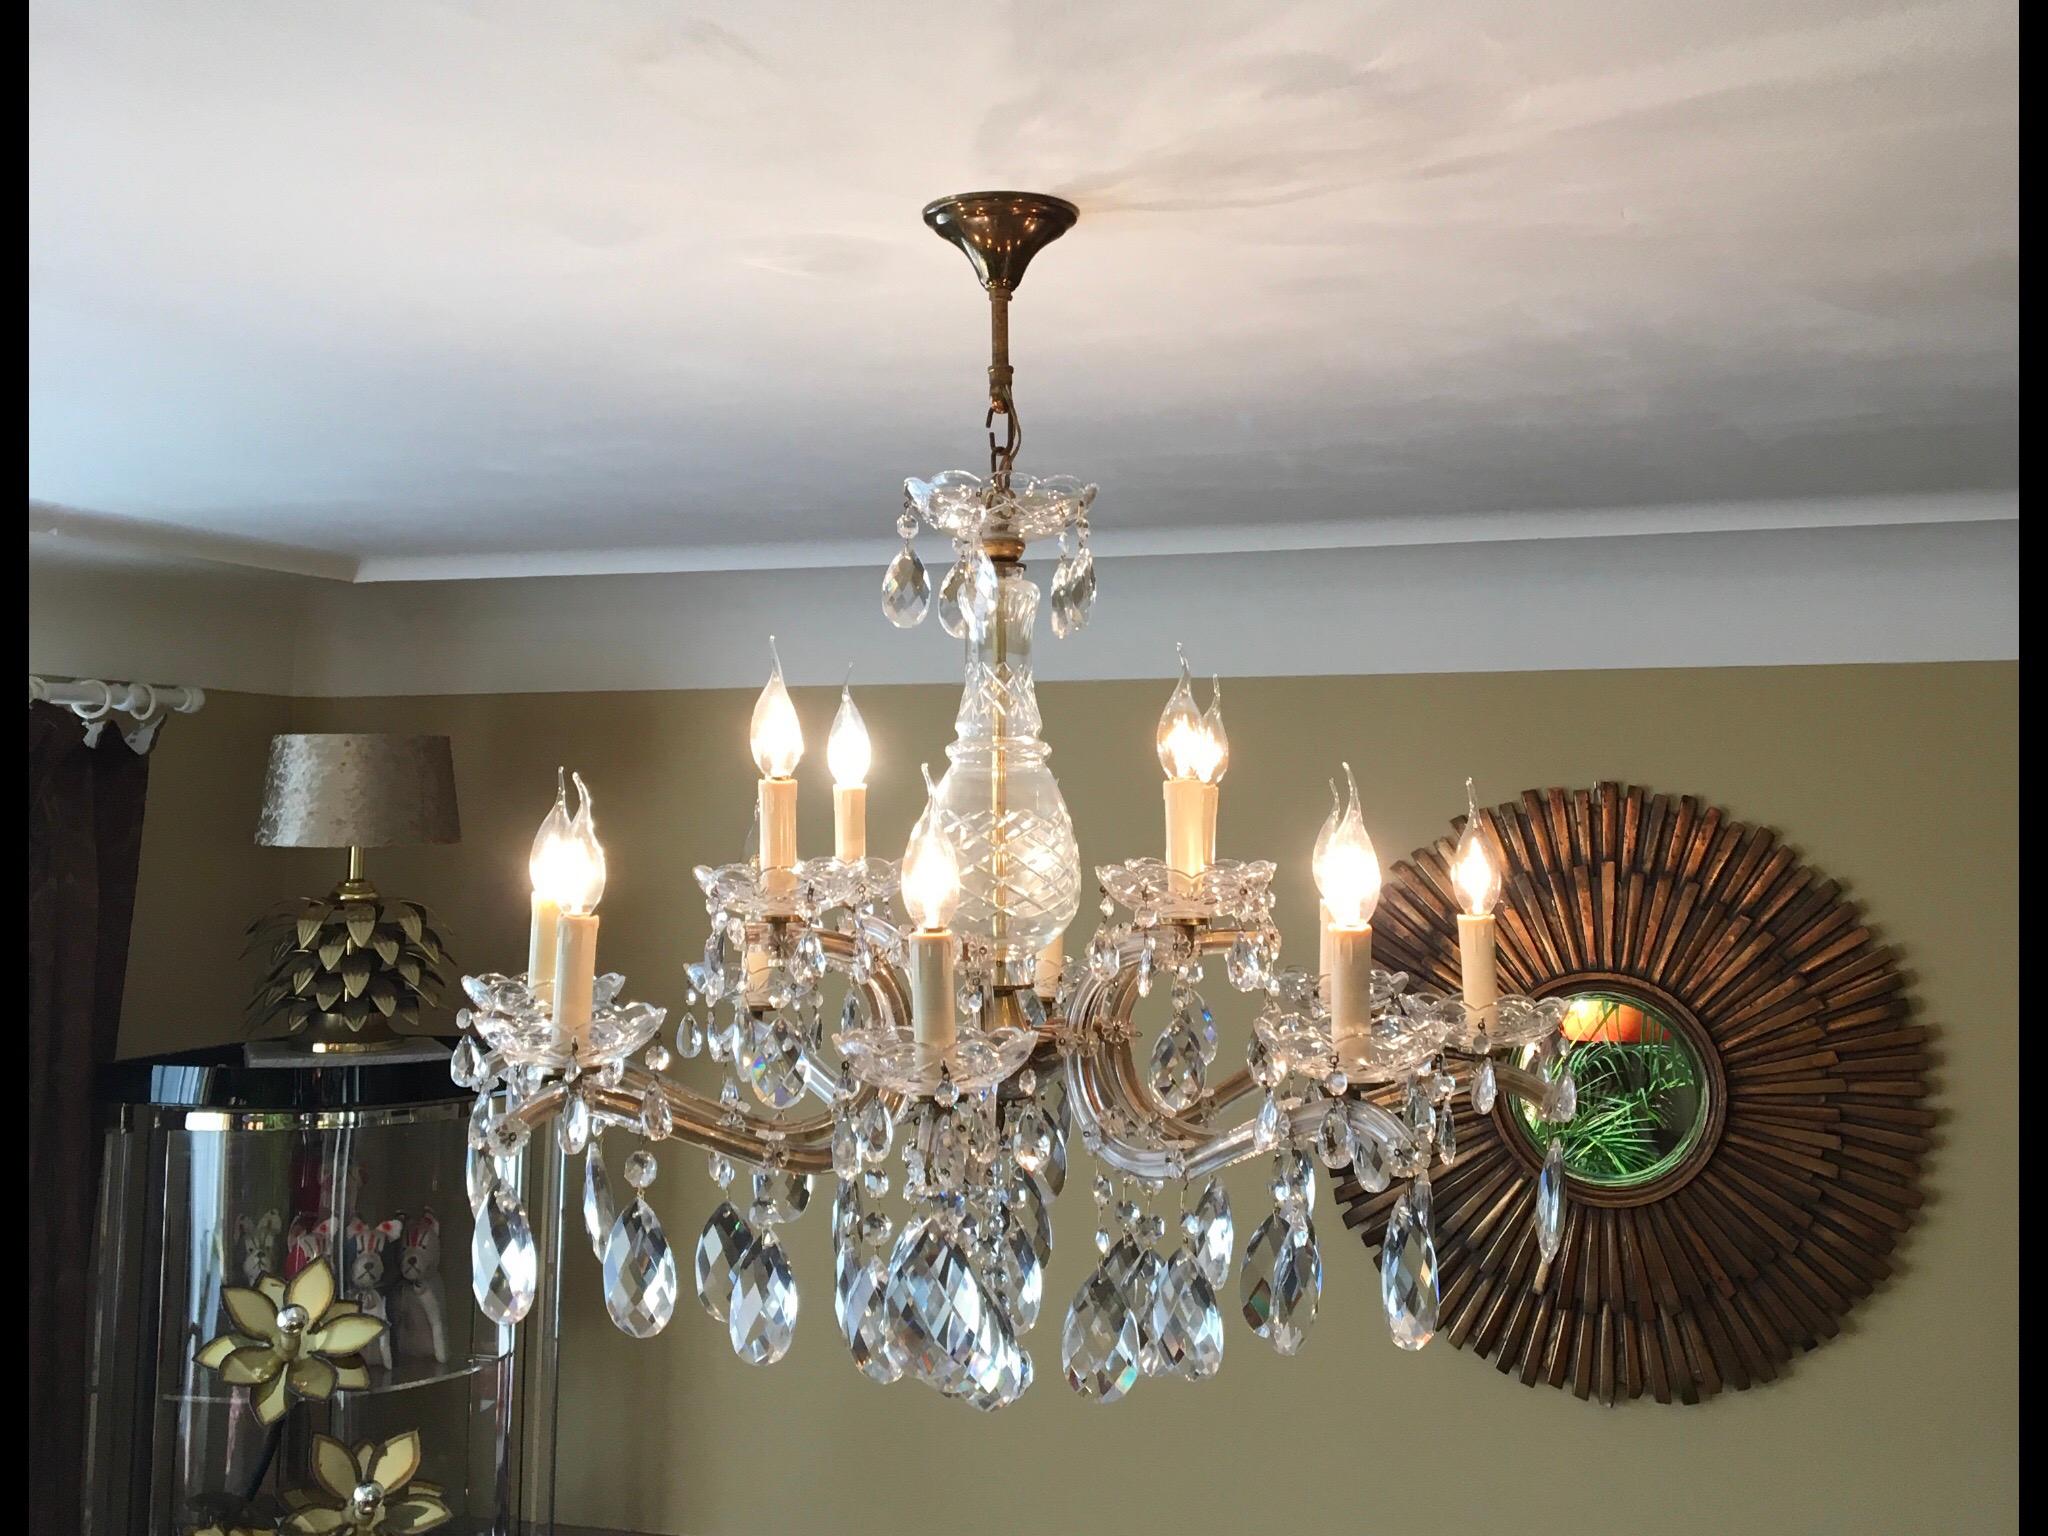 Elegant large Crystal Chandelier Maria Theresa style with 12 lights.
The frame is covered in crystal glass with hanging crystal pendants.
The clarity of the crystal along with the elaborate facet work of each drop,
gives this antique style